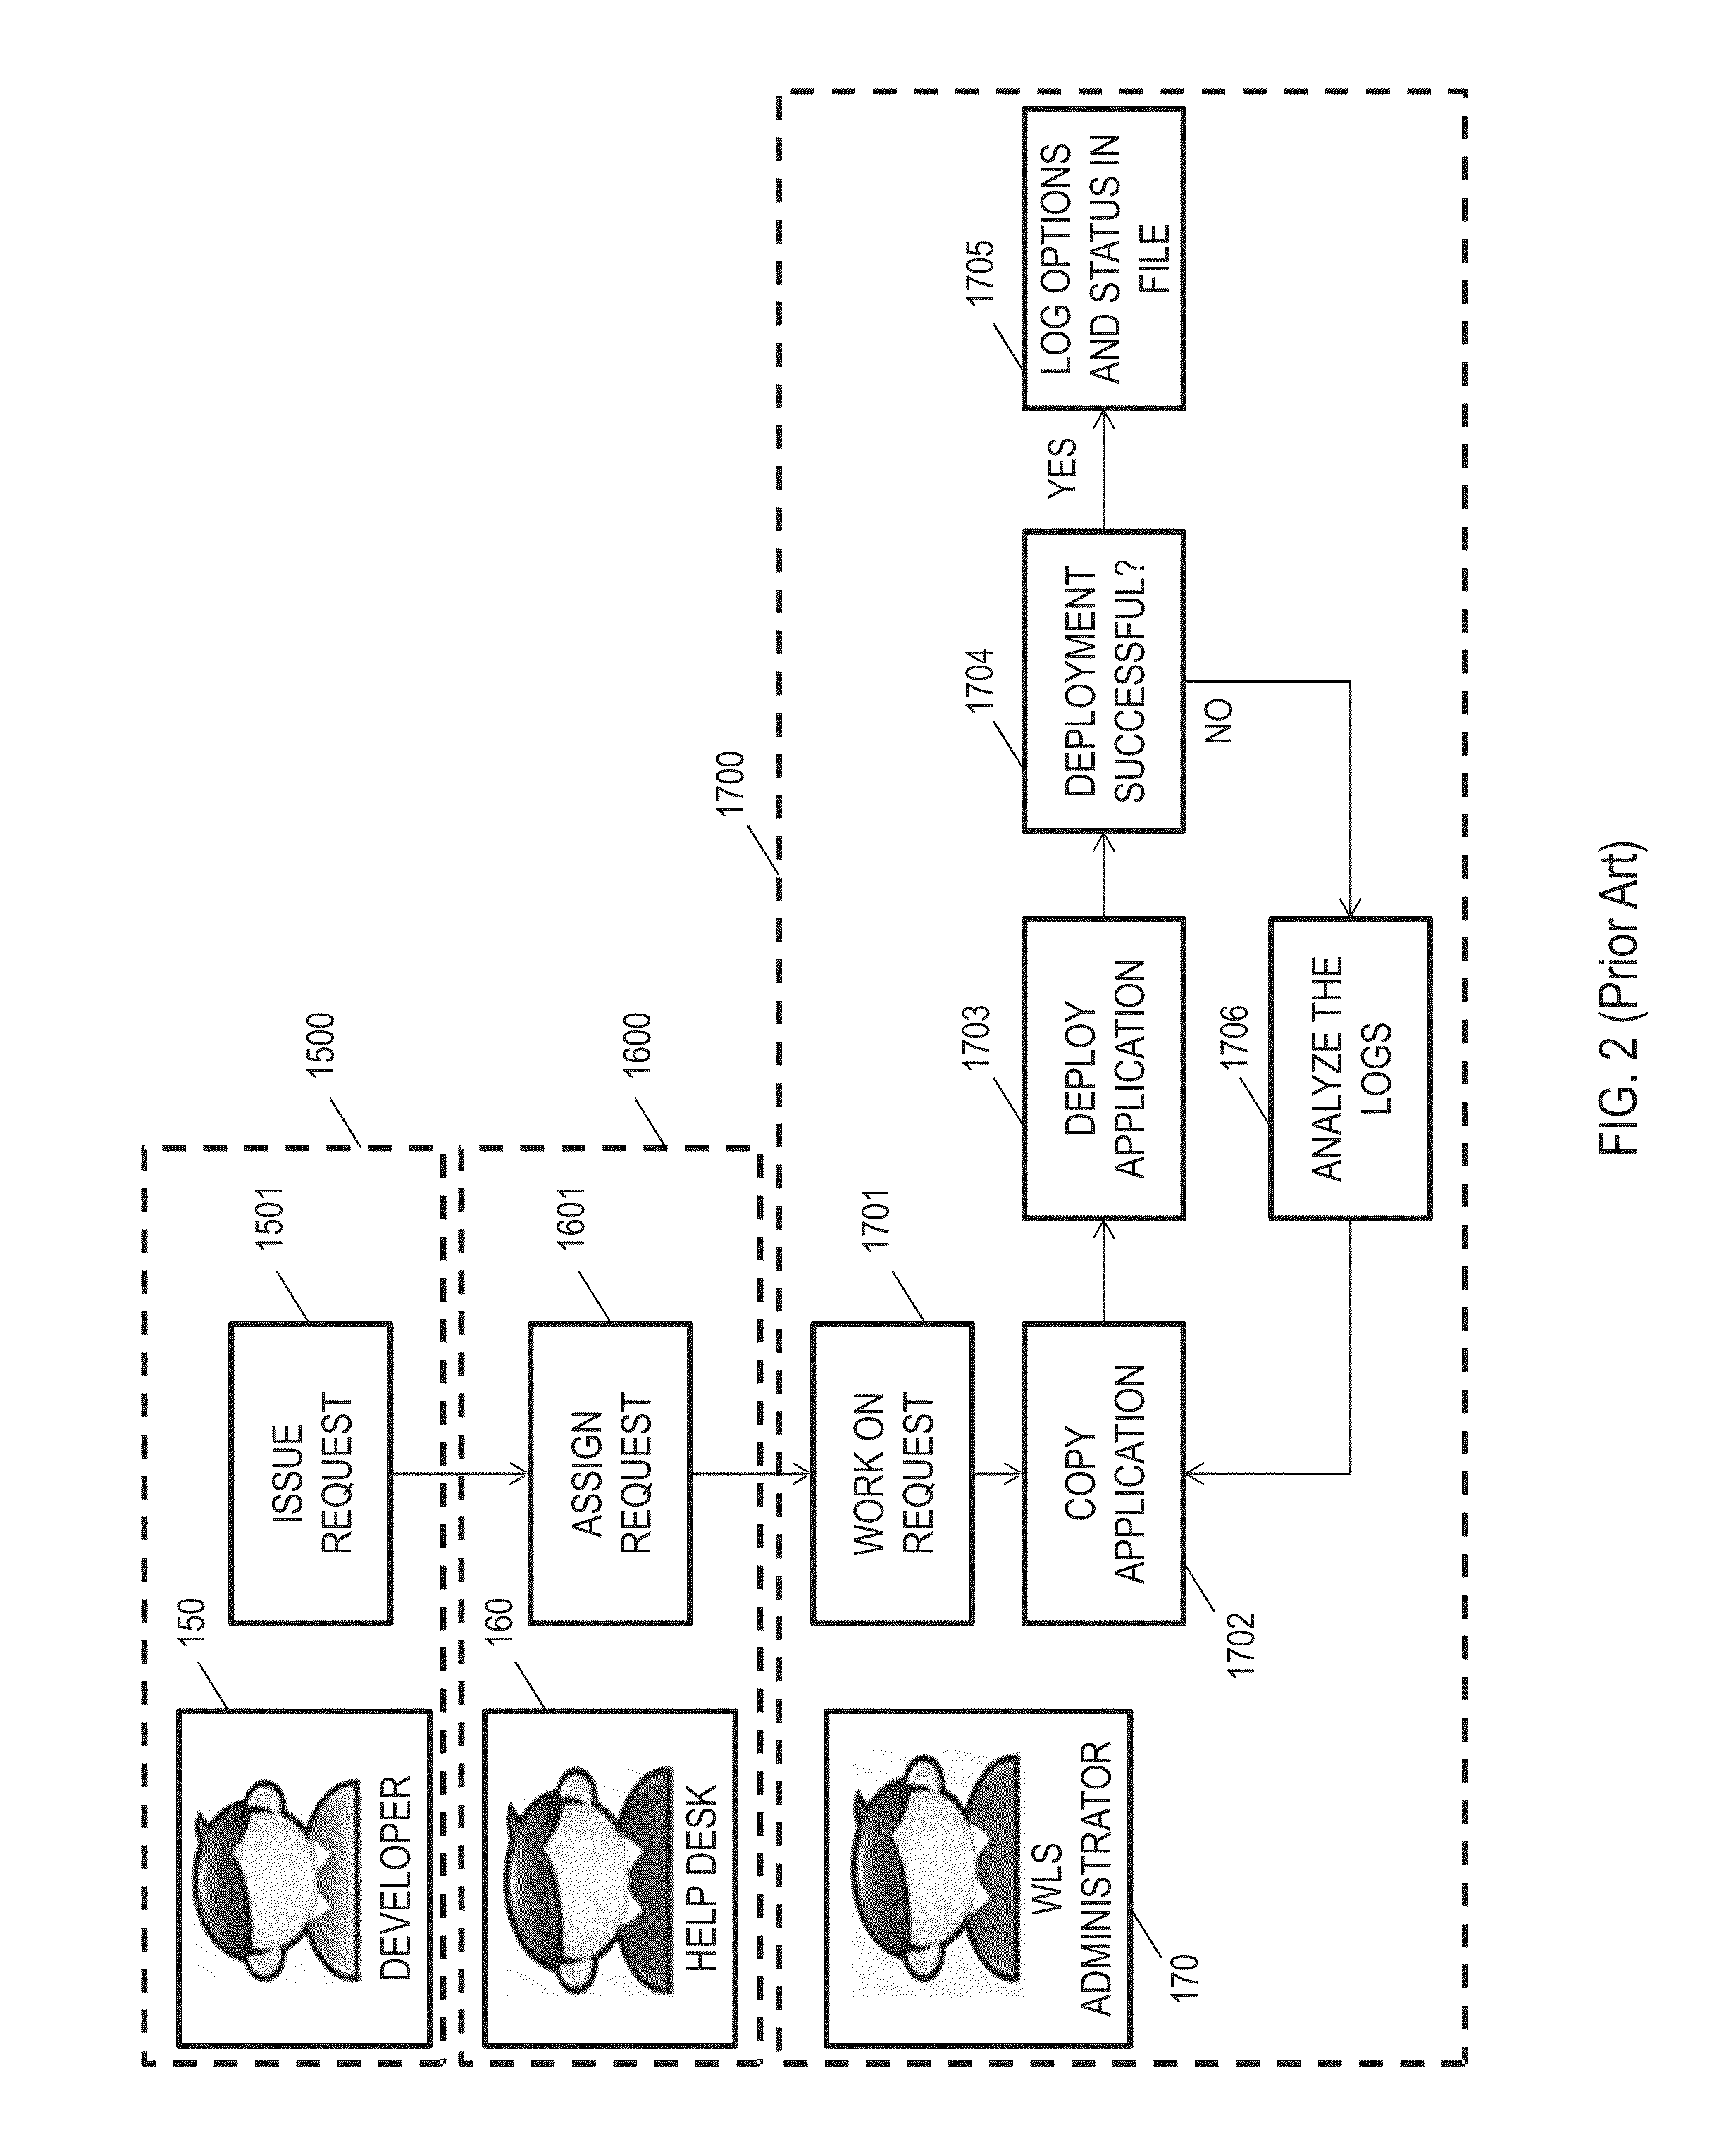 Systems, methods, and computer medium to enhance redeployment of web applications after initial deployment